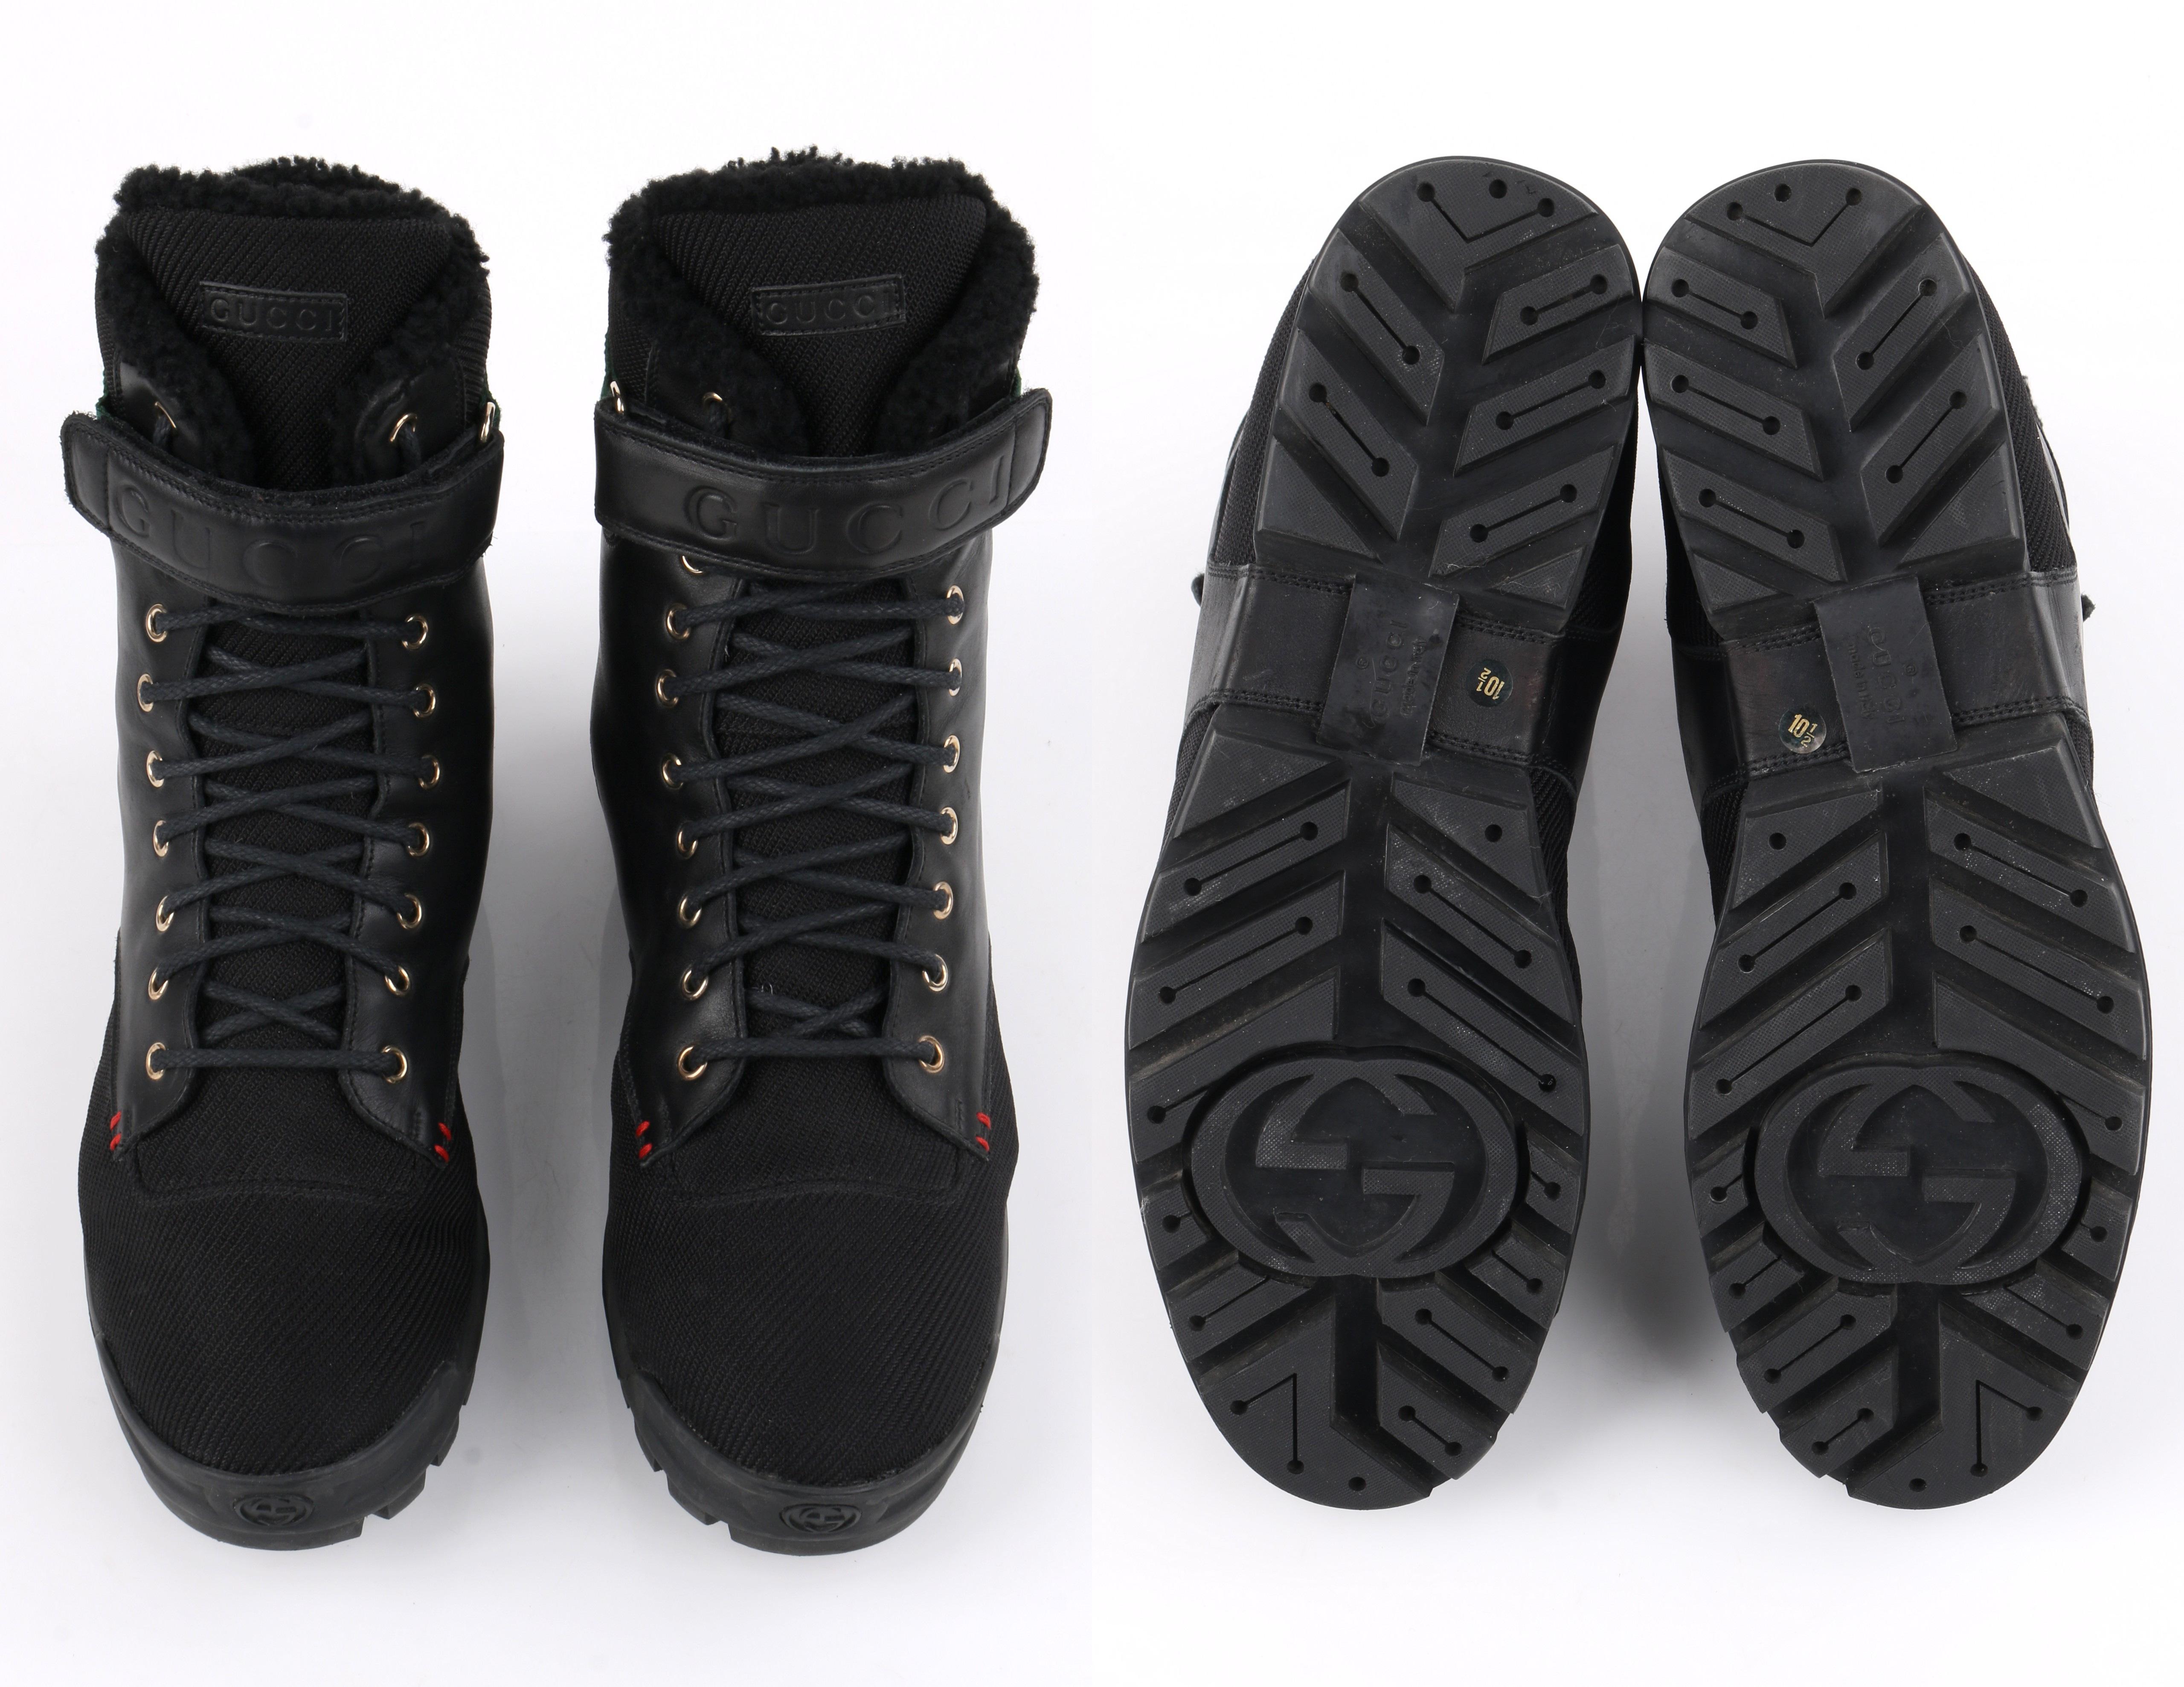 GUCCI Black Leather Signature Webbing Shearling Lined Combat Boots 2